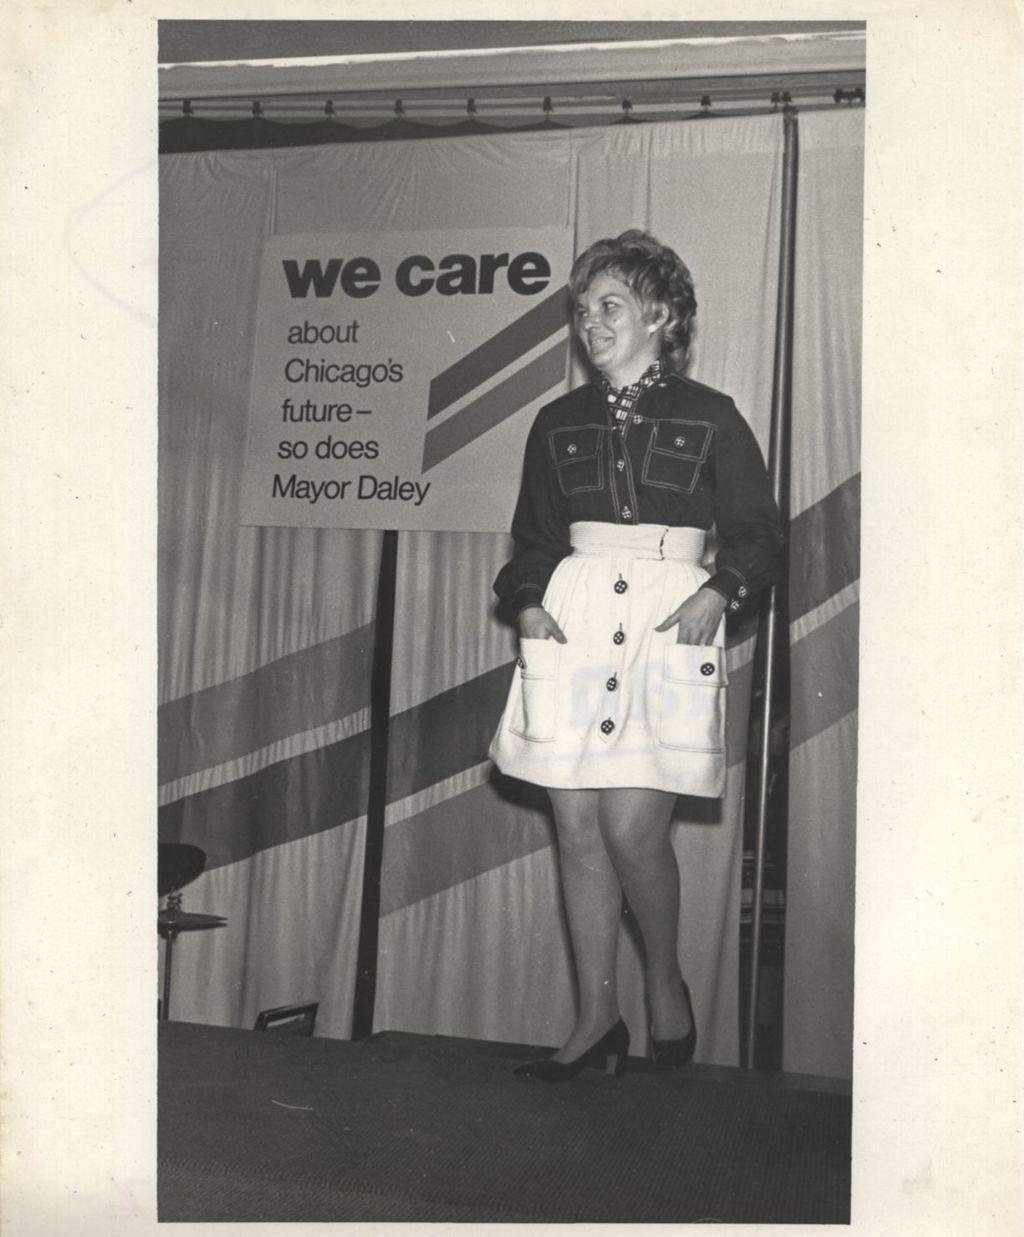 Eleanor R. Daley modeling an outfit at a "We Care" event